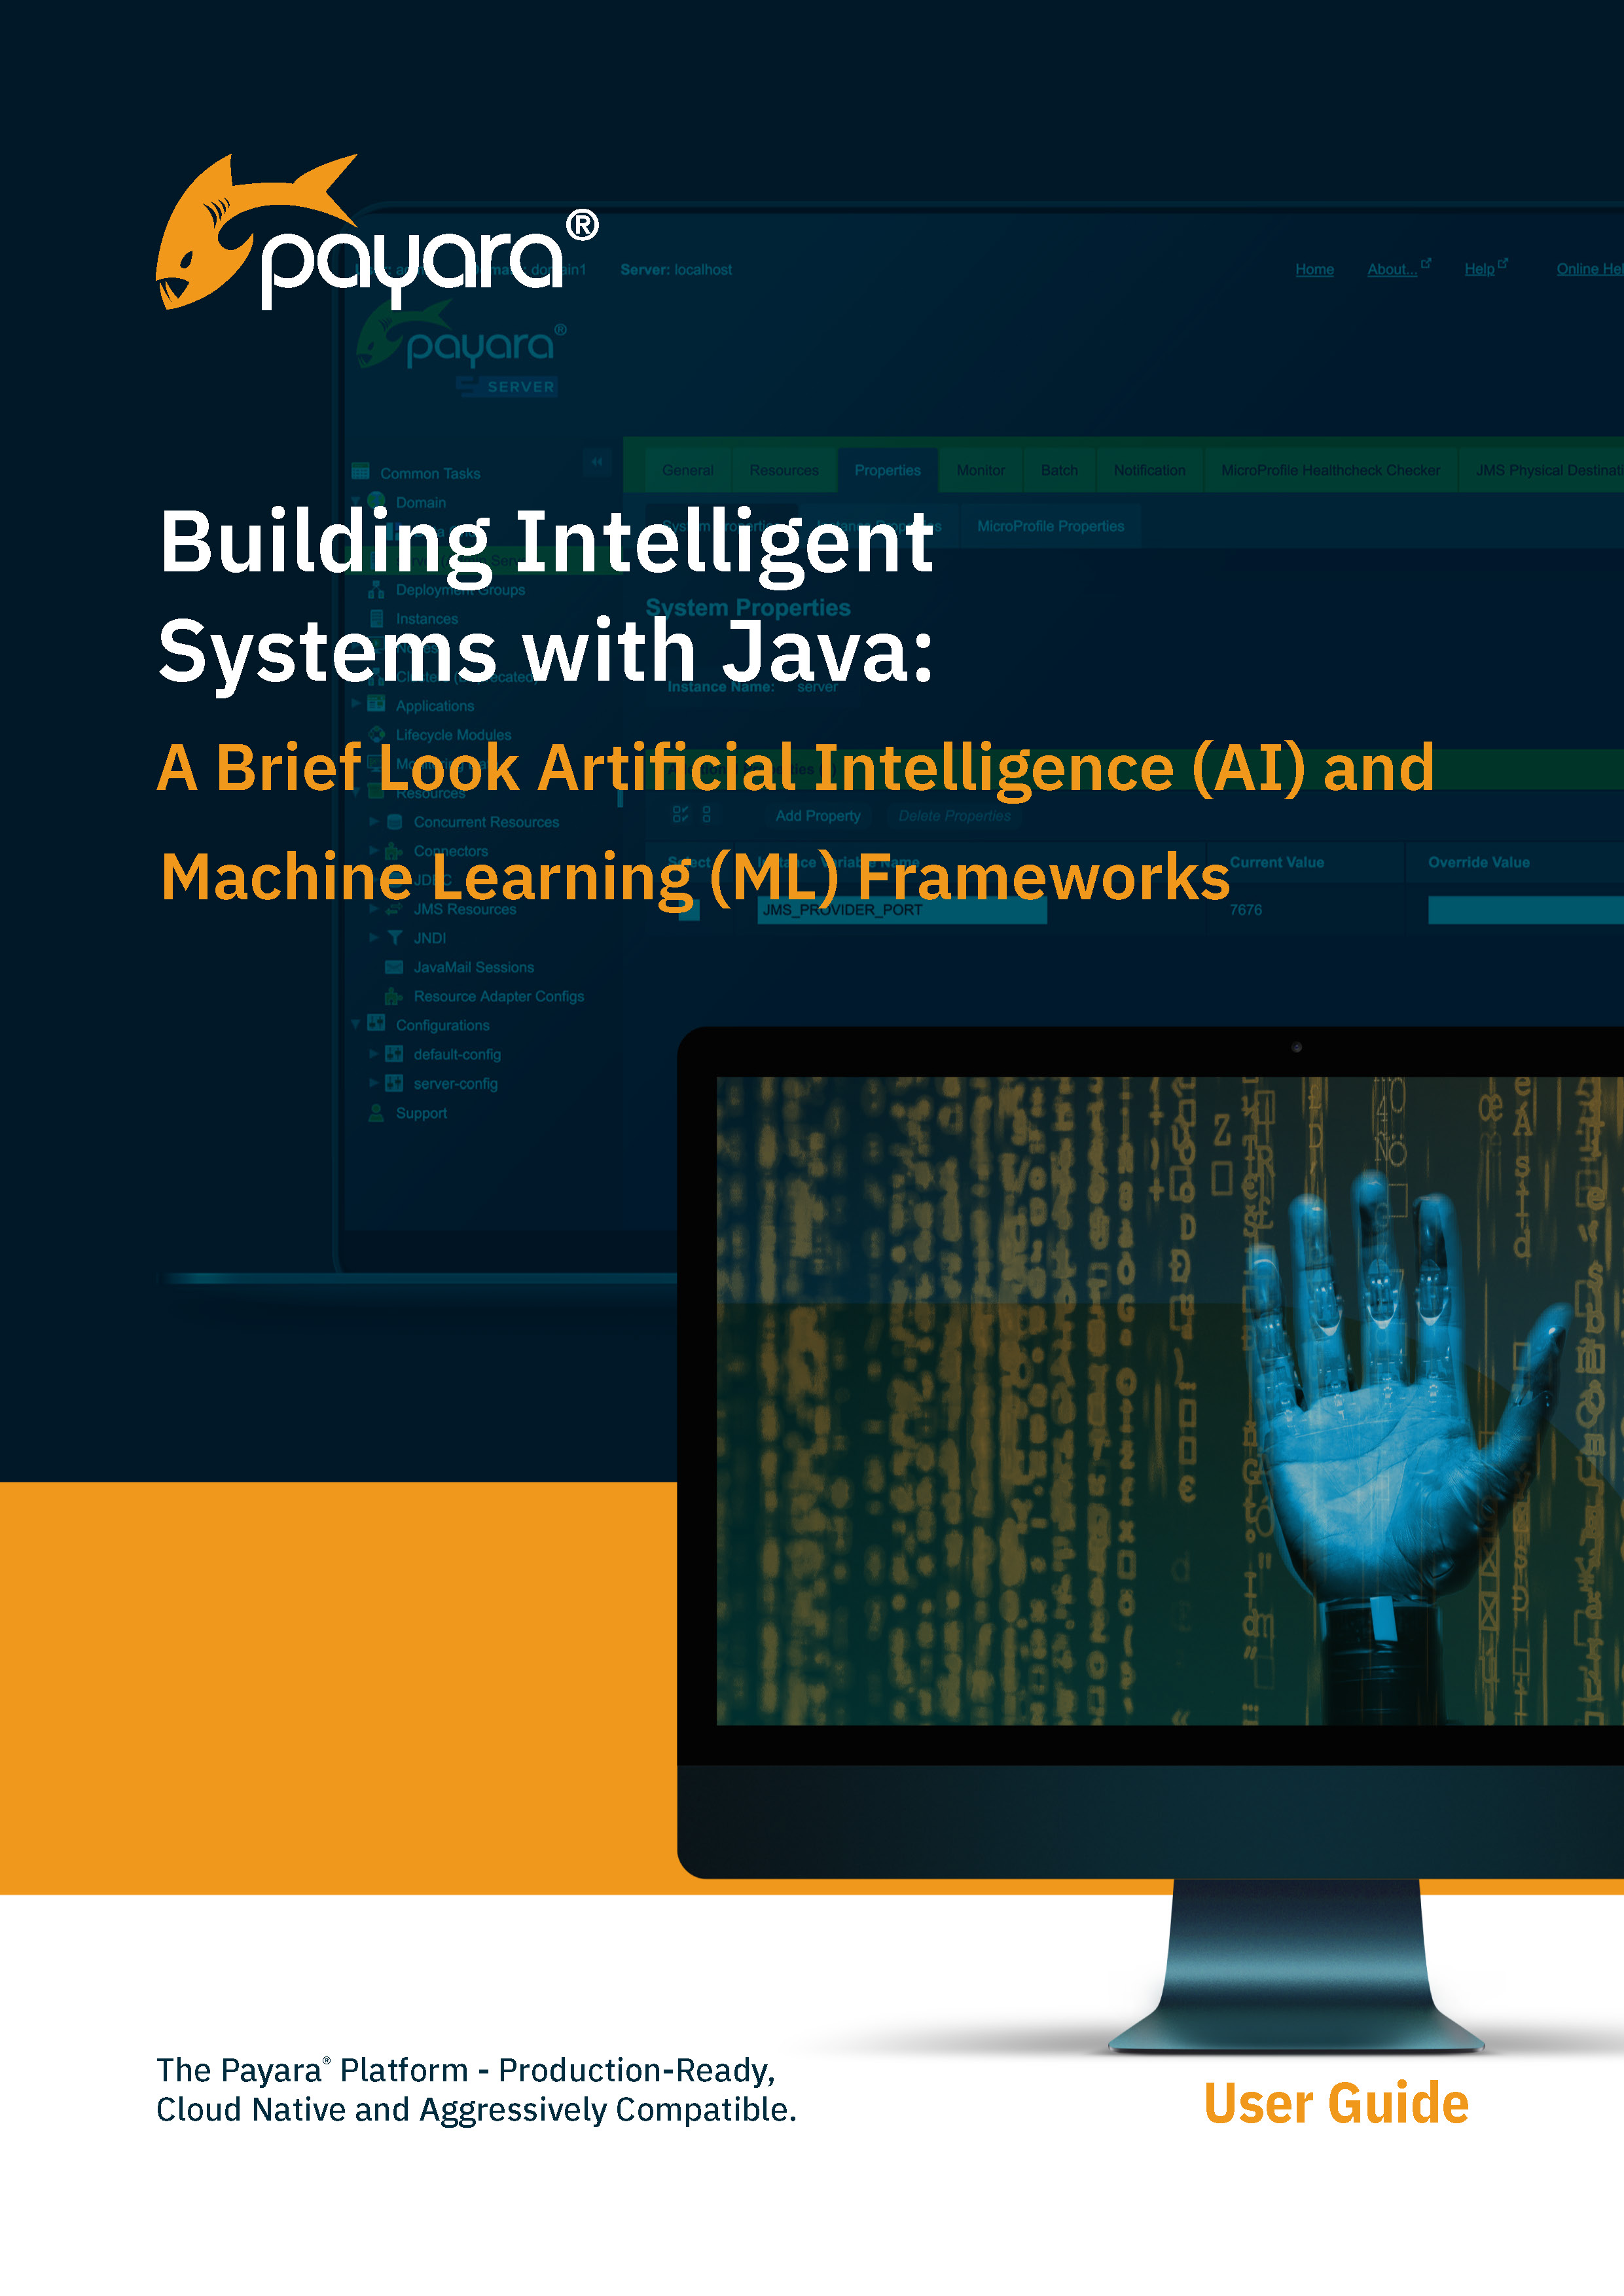 Building Intelligent Systems with Java A Brief Look AI and Machine Learning Frameworks